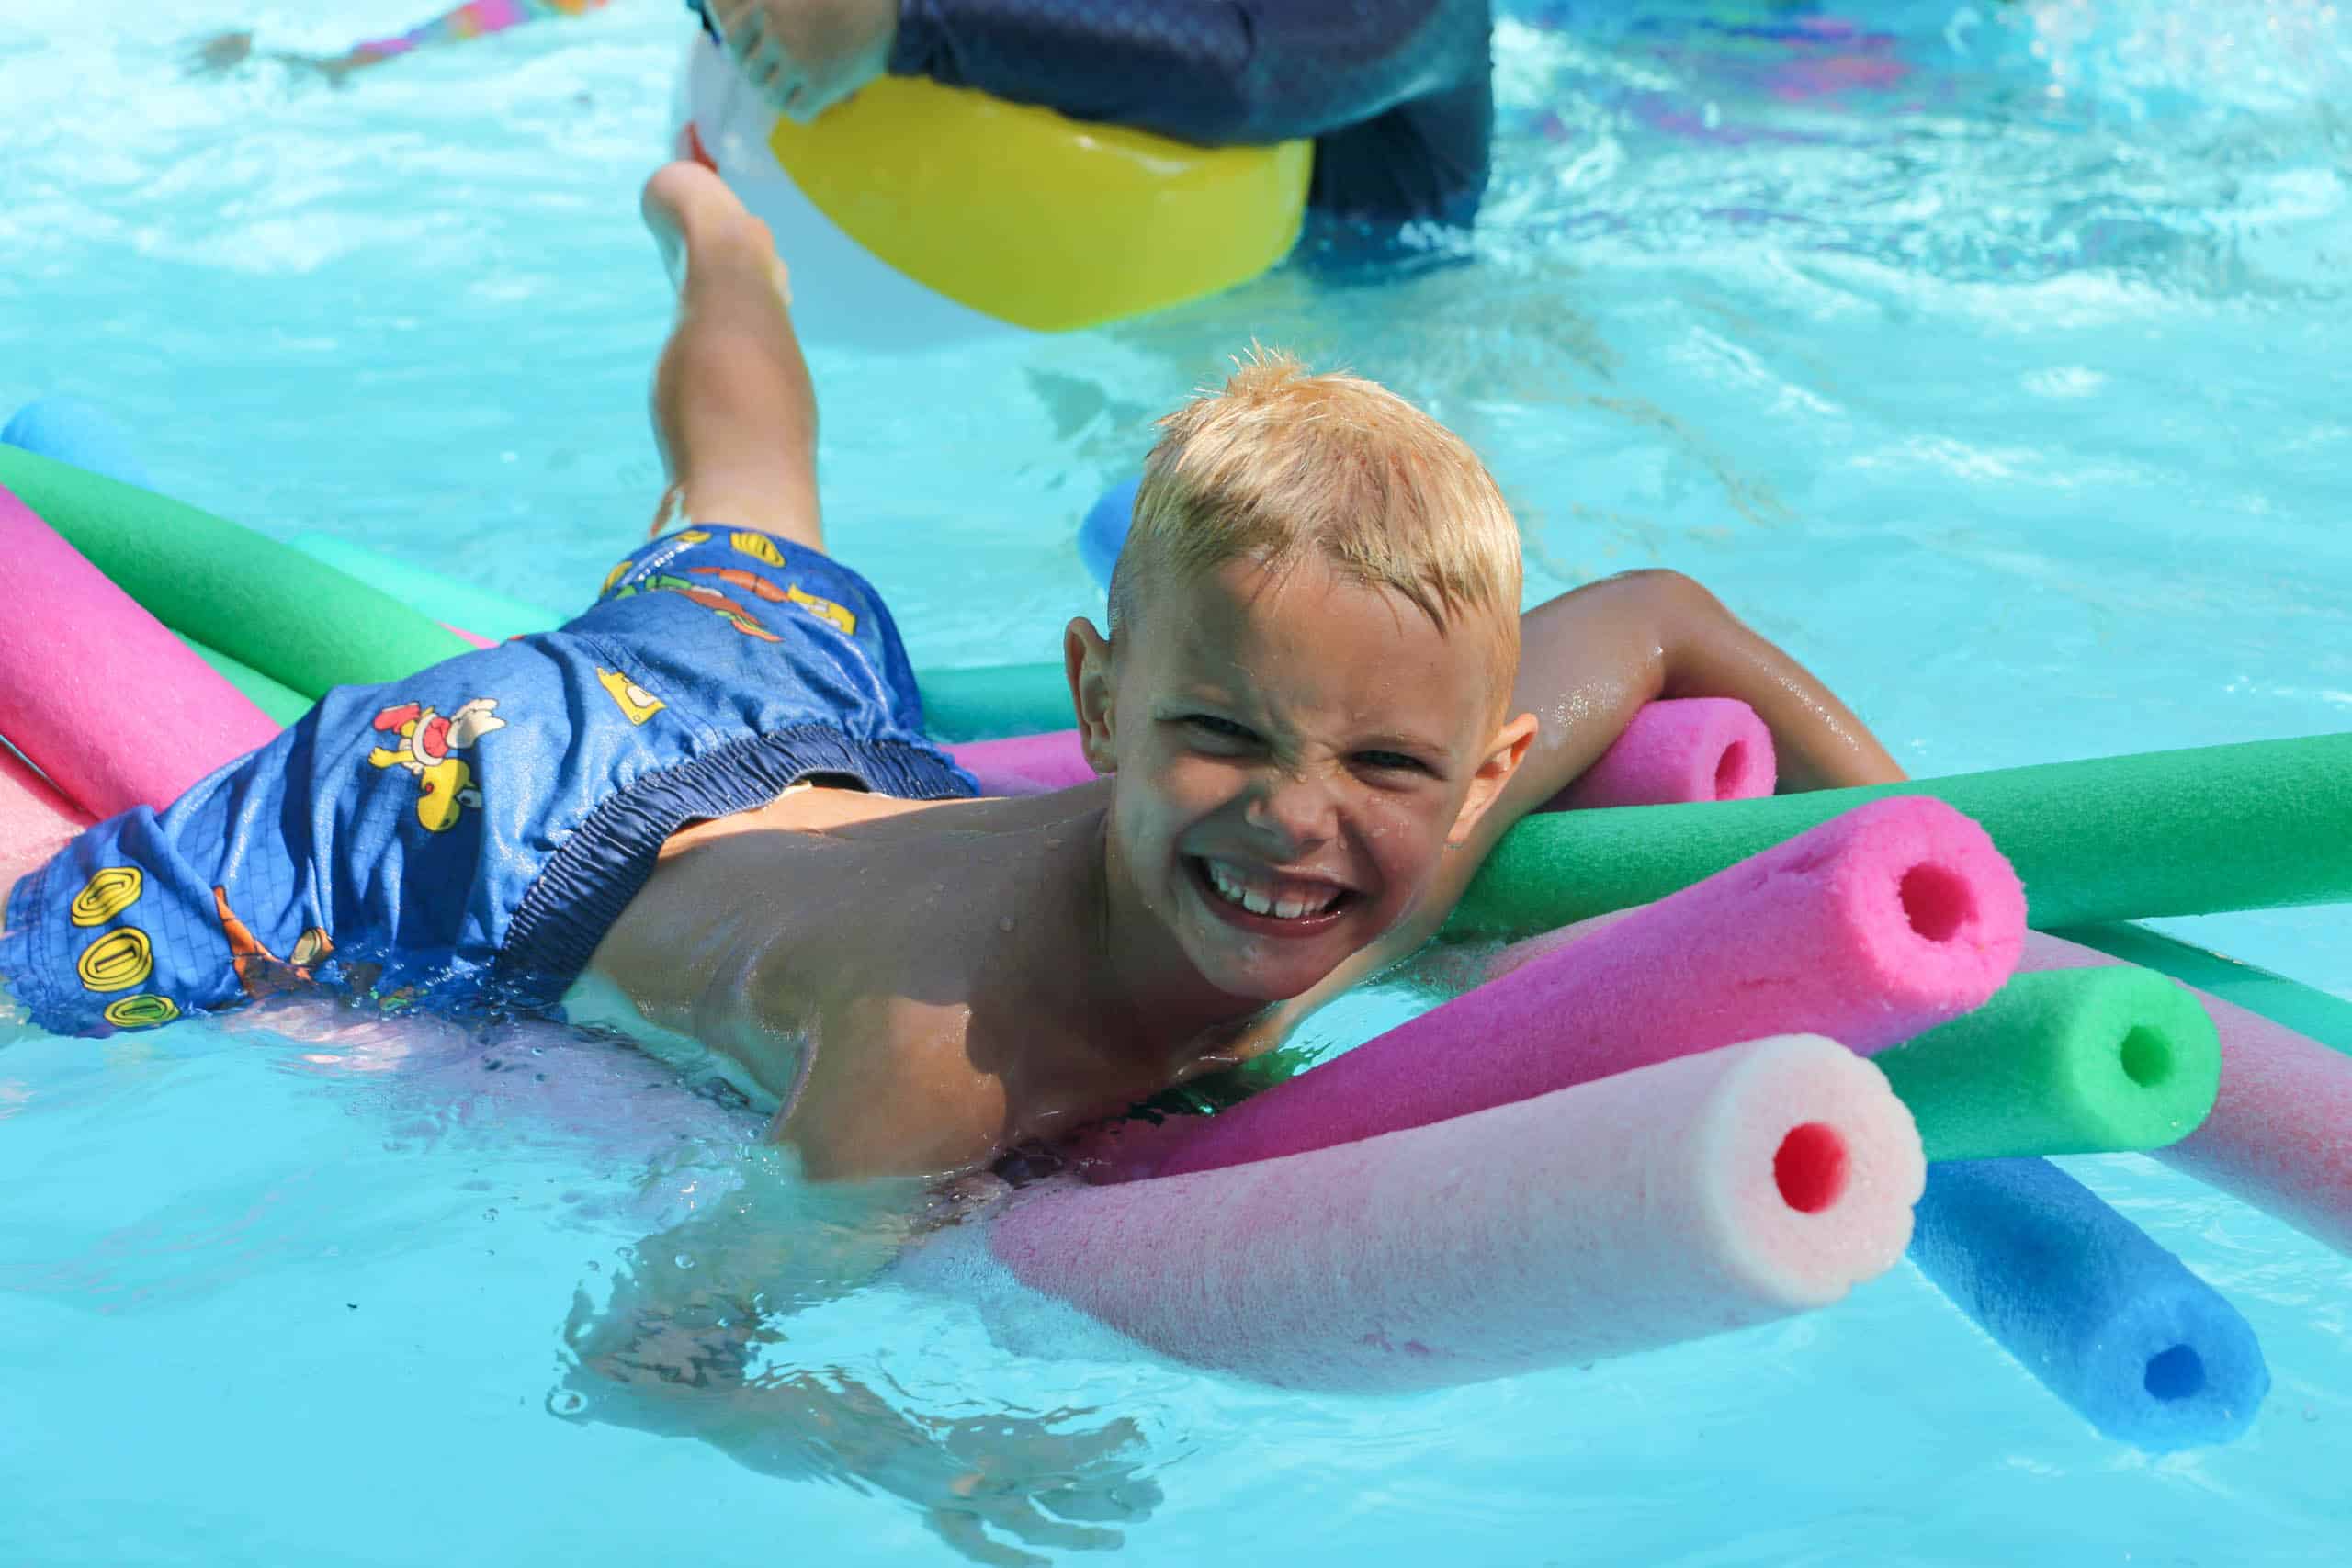 A young boy lays on colorful floats in a pool at summer camp in Iowa.